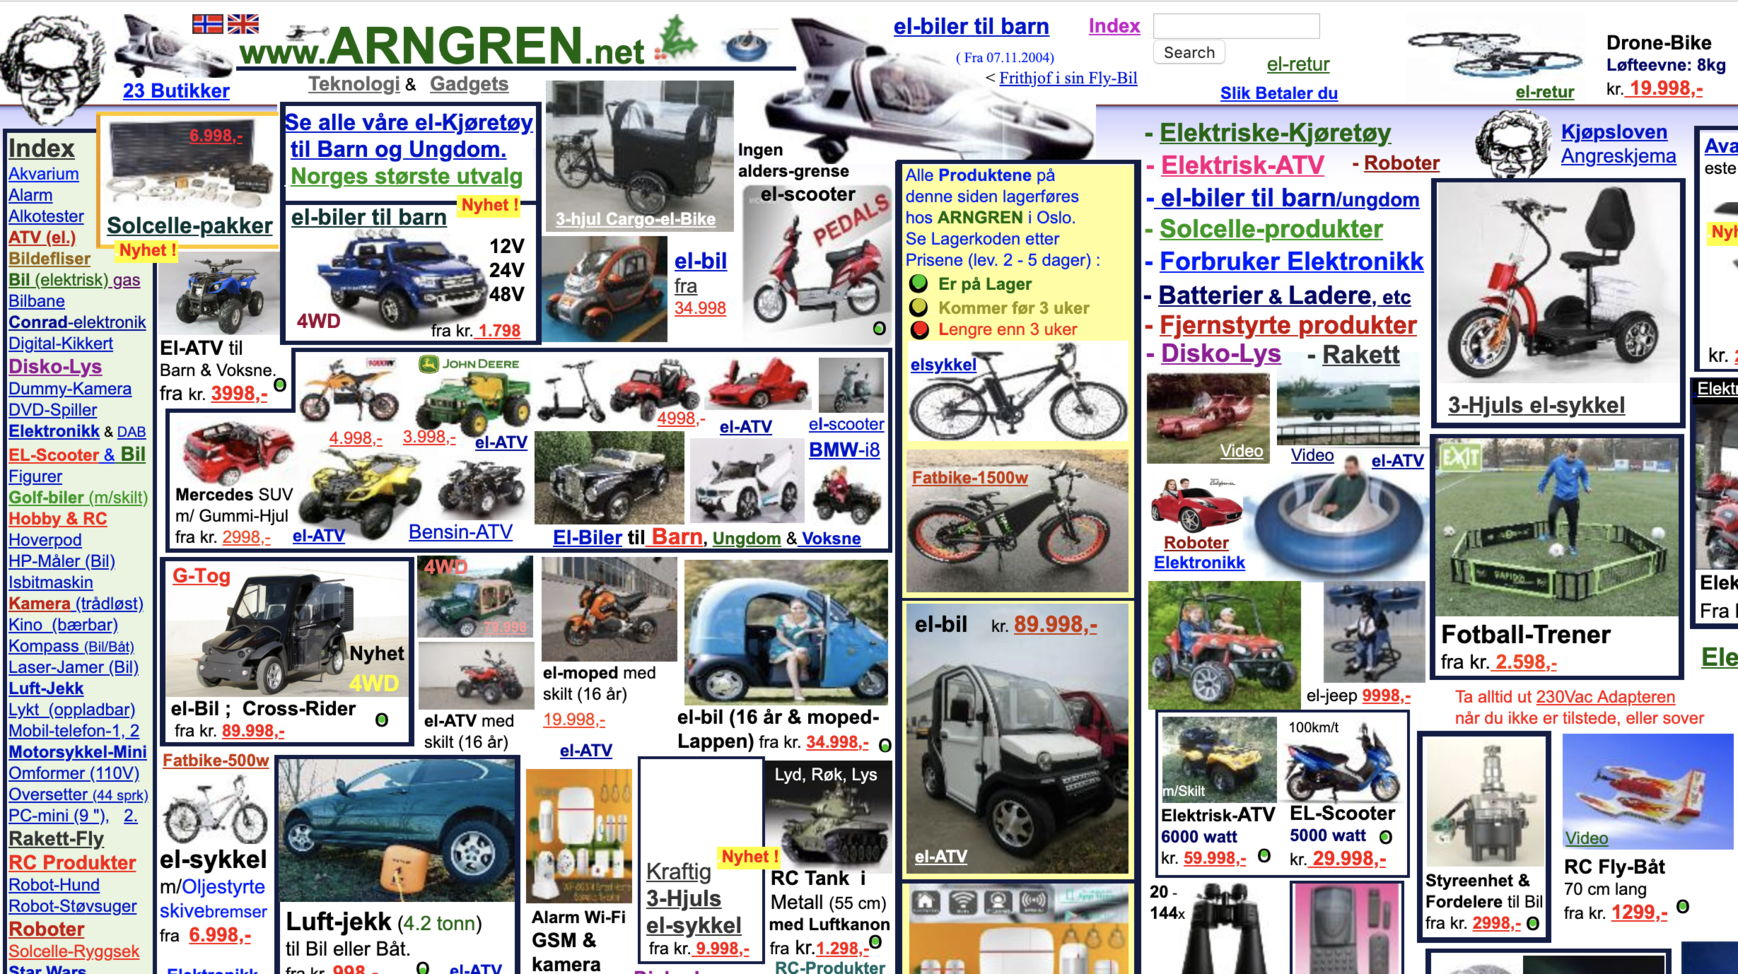 example of a website created in the early 2000s visual and functional style